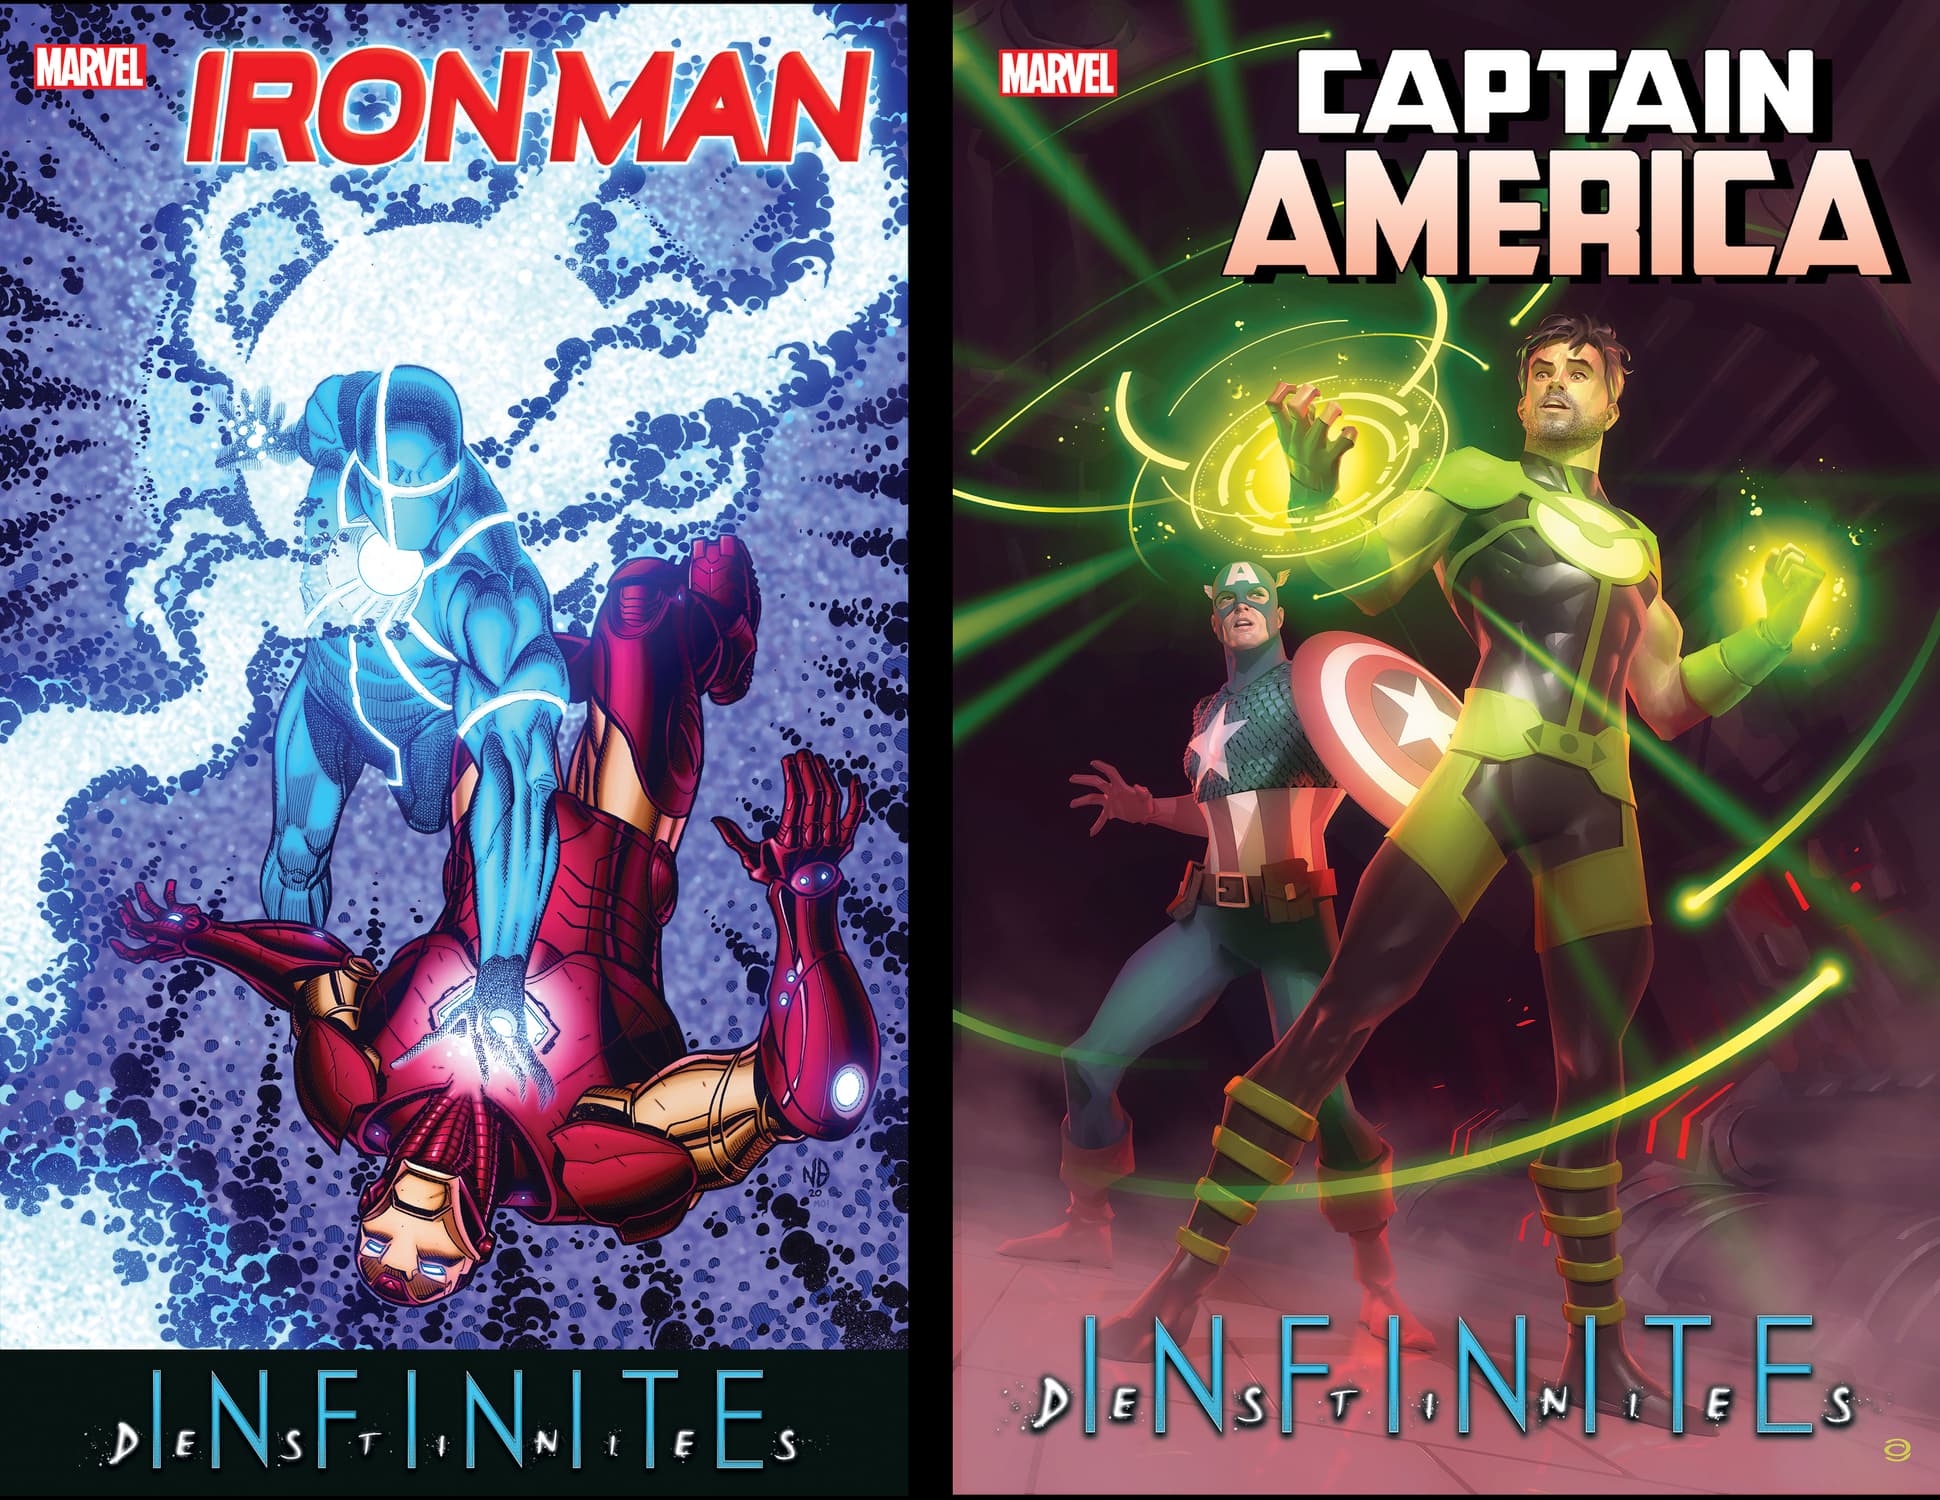 Captain America Annual and Iron Man Annual